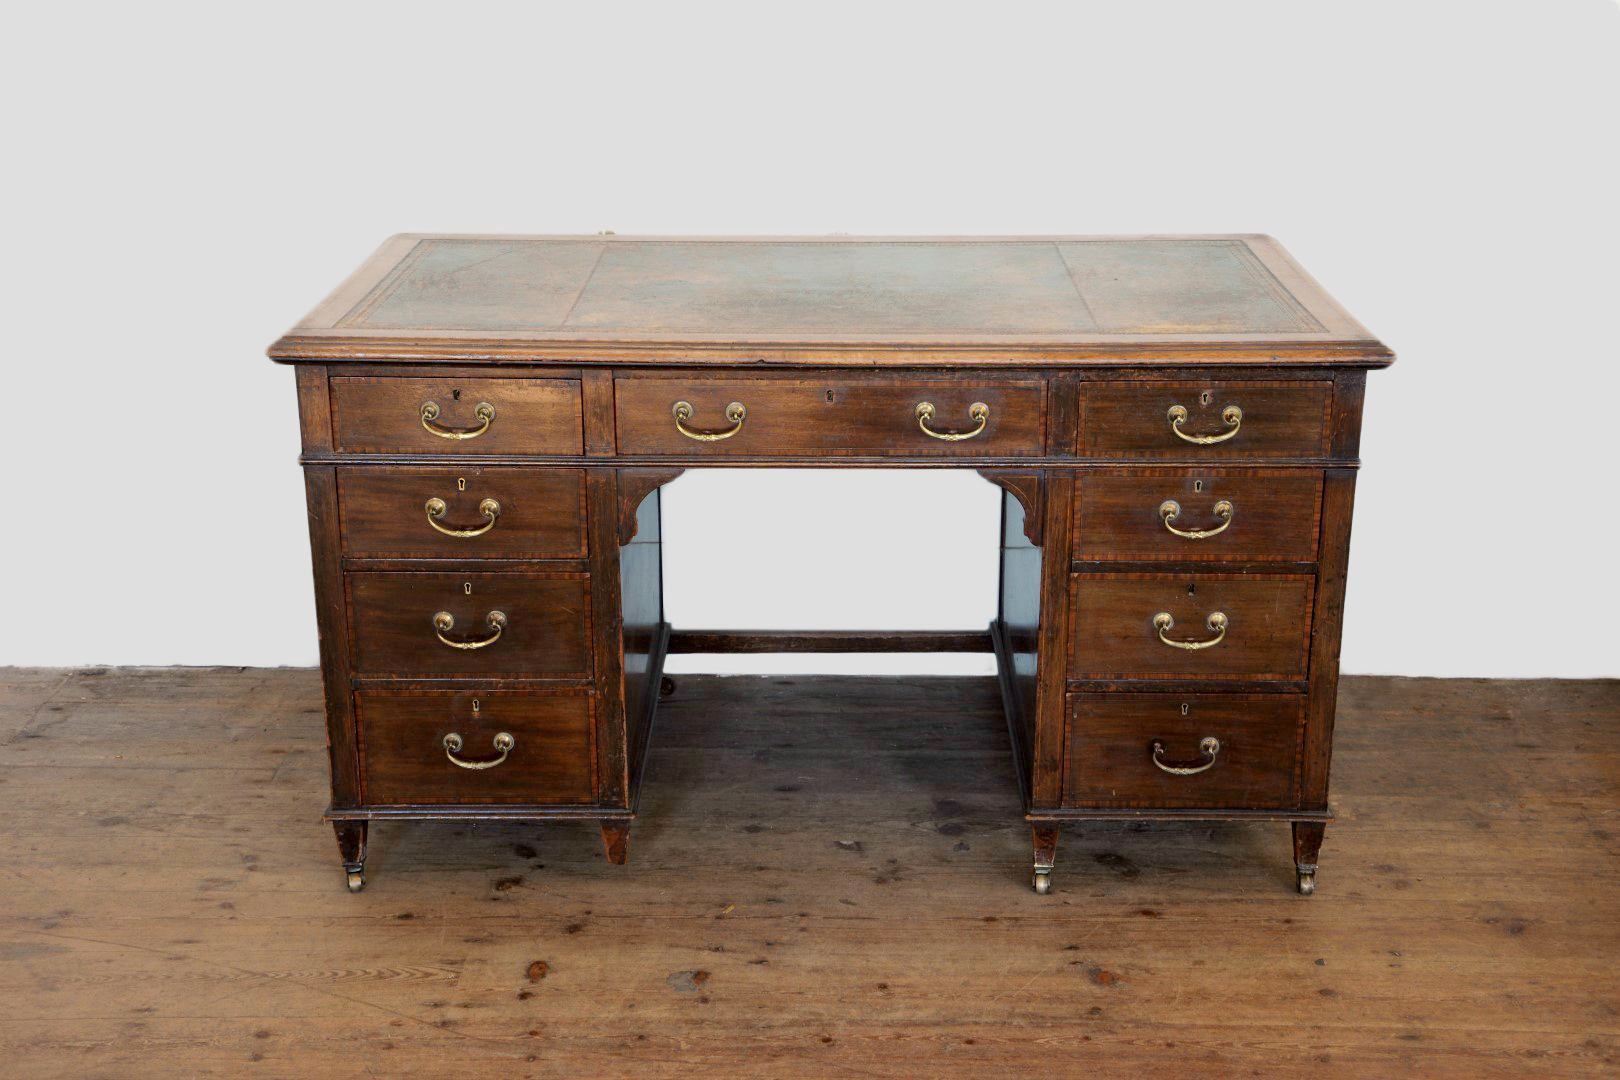 An Edwardian mahogany desk with tooled leather inset top, three frieze drawers and with three